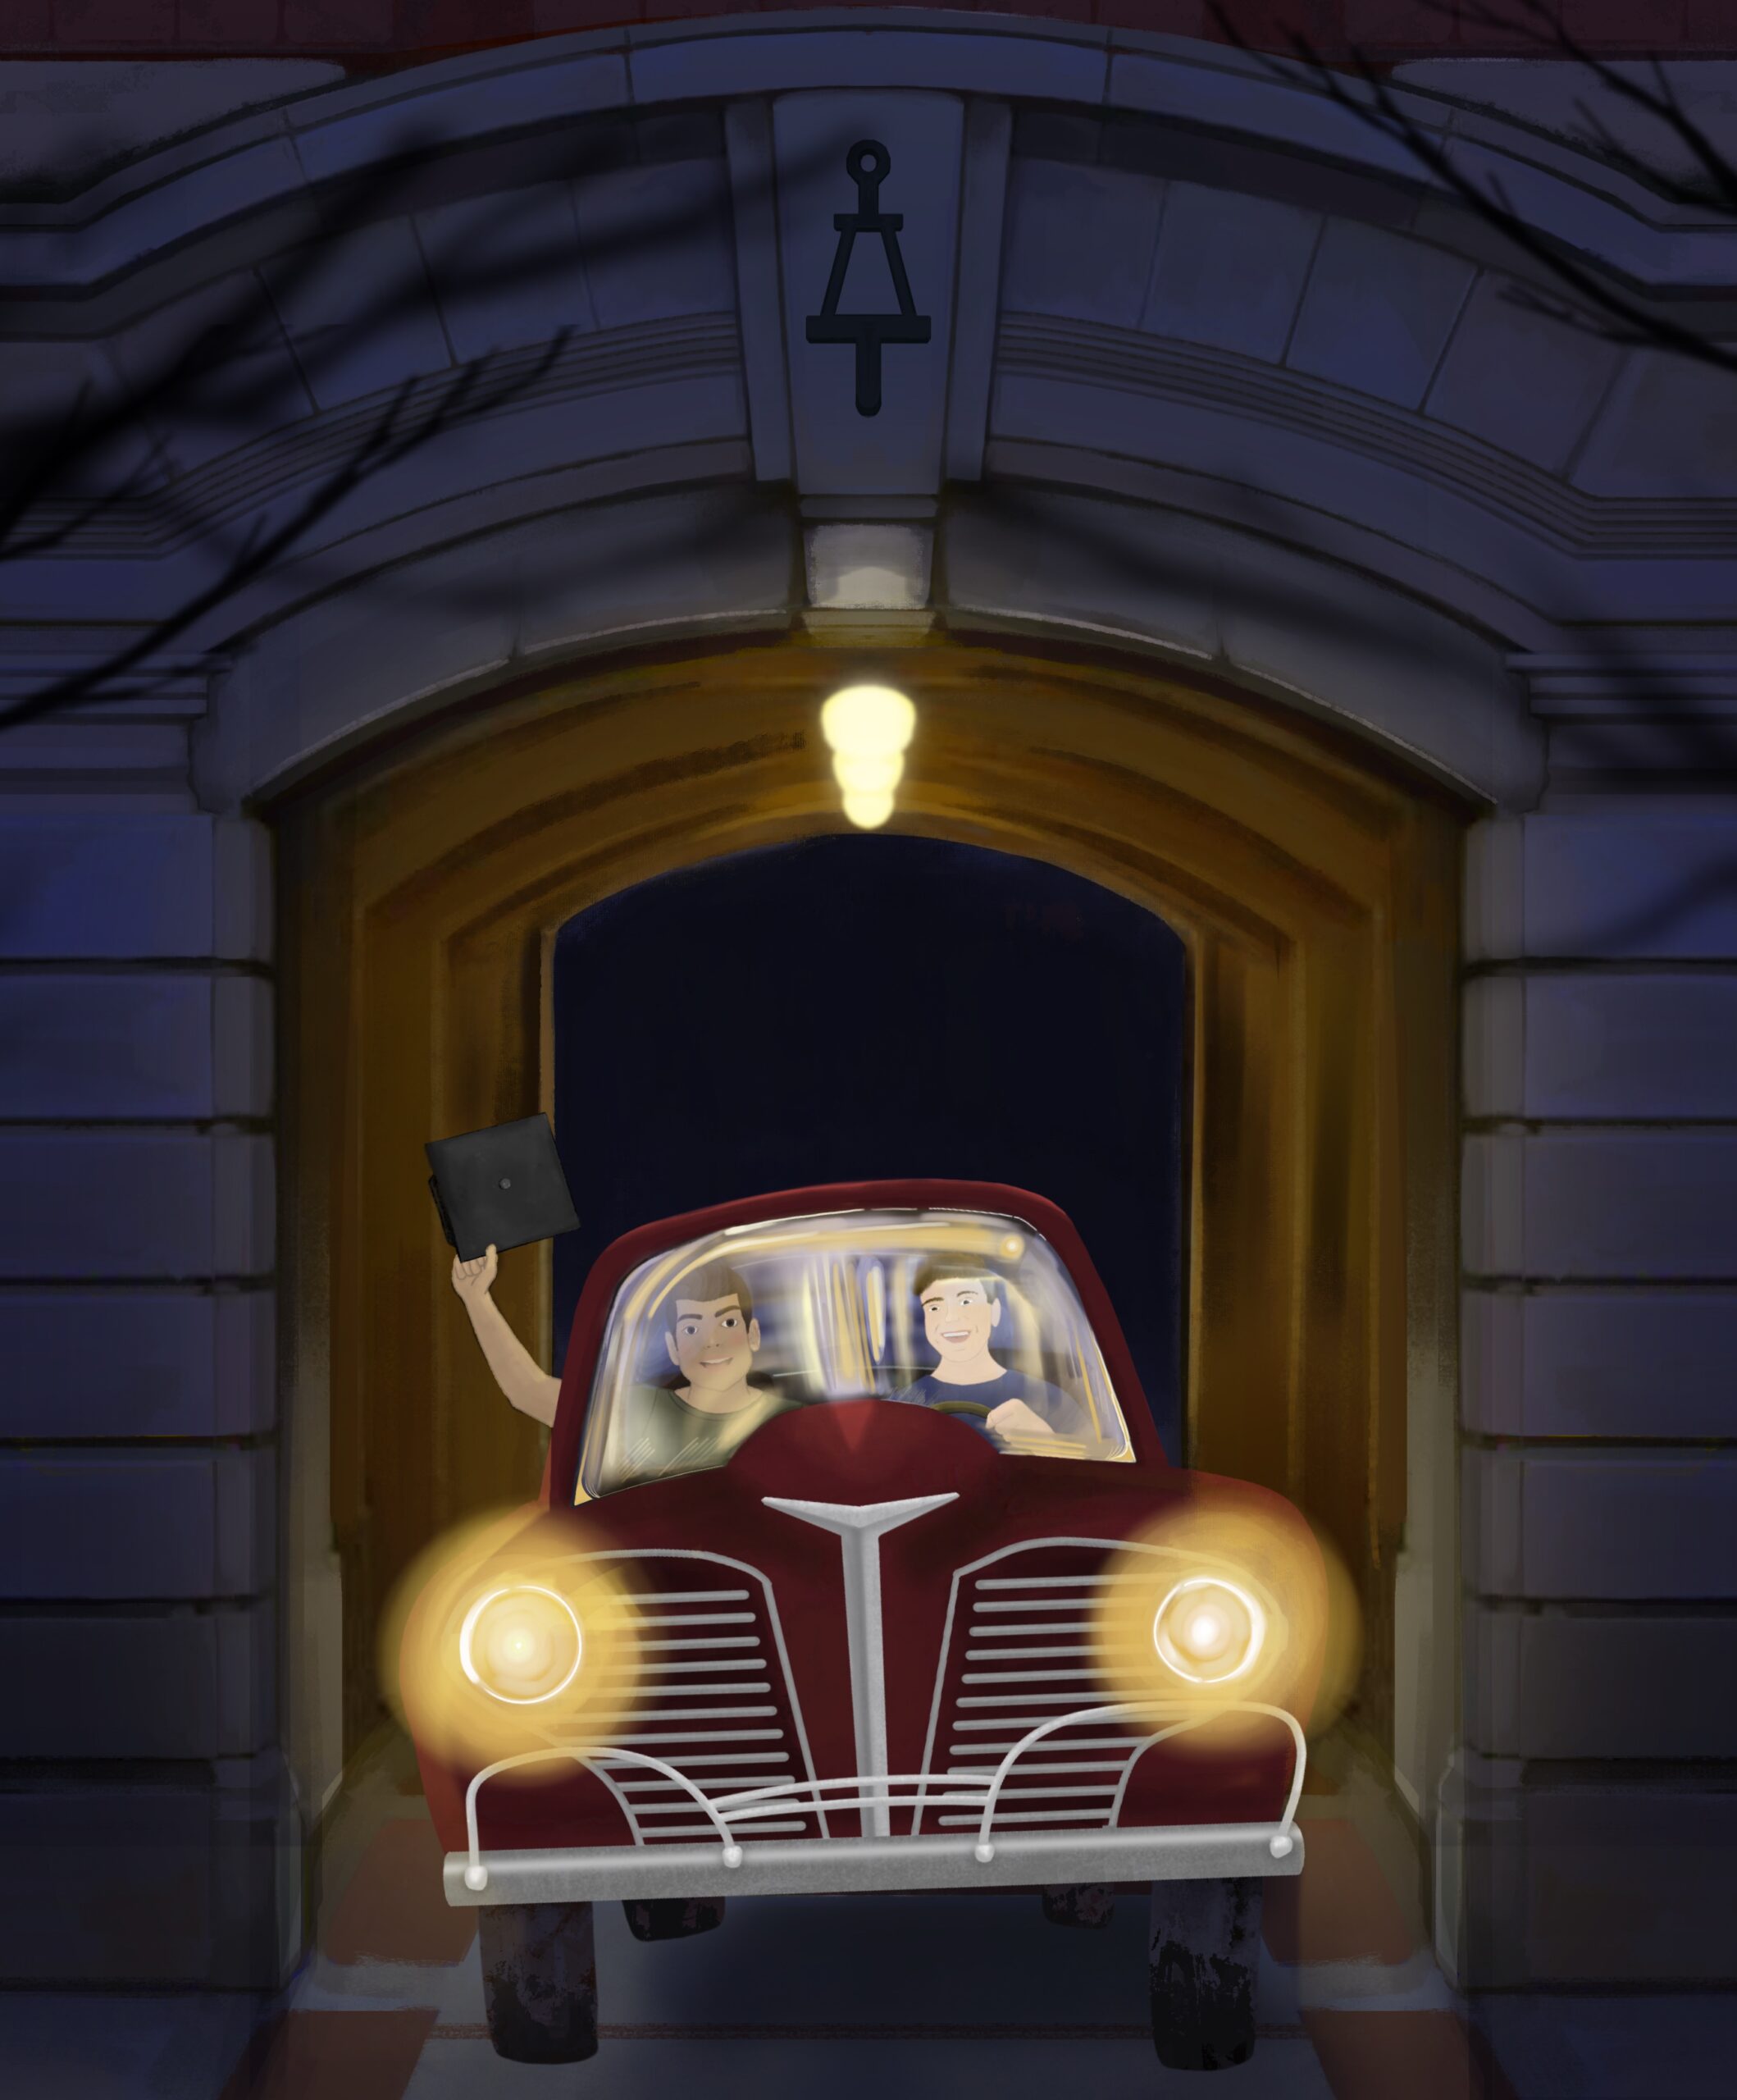 An illustration of two students riding in a maroon car through an archway at night. One student is holding a graduation cap out the window.